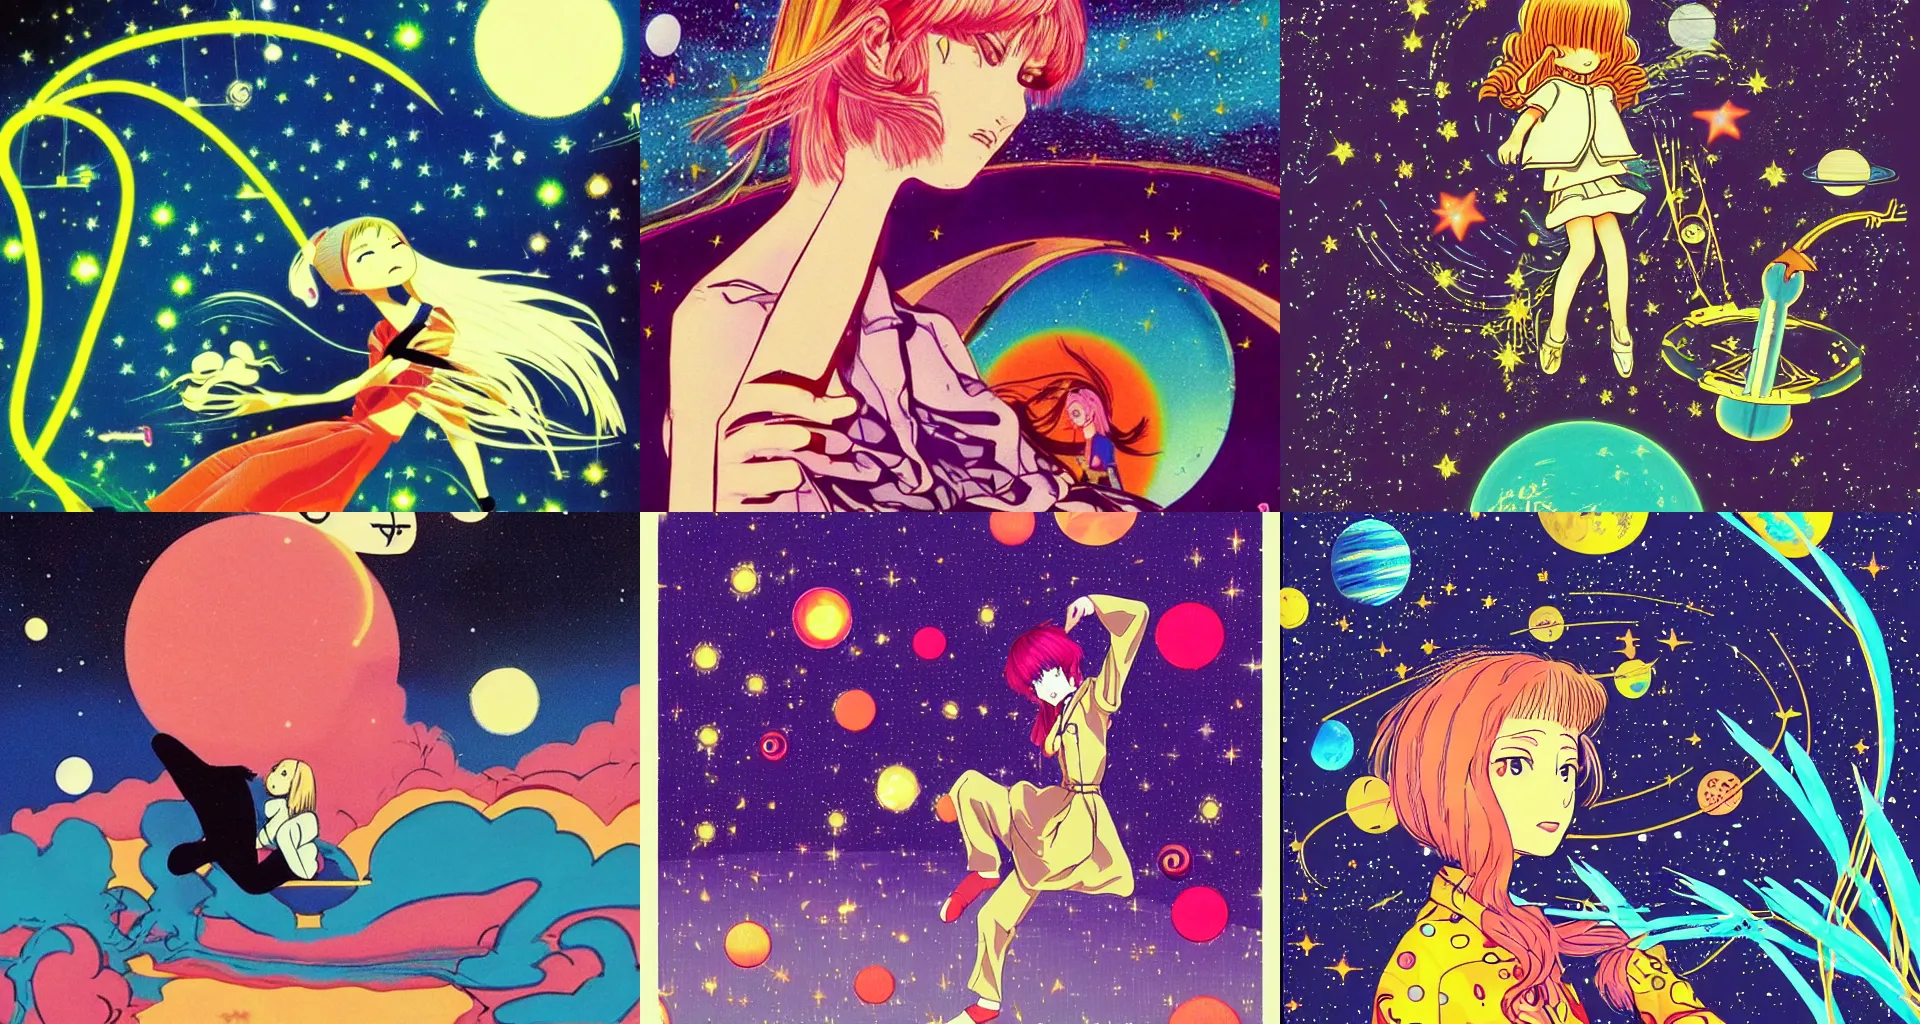 Prompt: 'There is nothing so loathsome as a sentimental surrealist.' illustration by asxi kdi, zido, 80s retro anime aesthetic wallpaper. An isolated girl, dreaming of the galaxy express. I dream of a futuristic, utopian space ship, complete with the sound of the stars dancing to our music